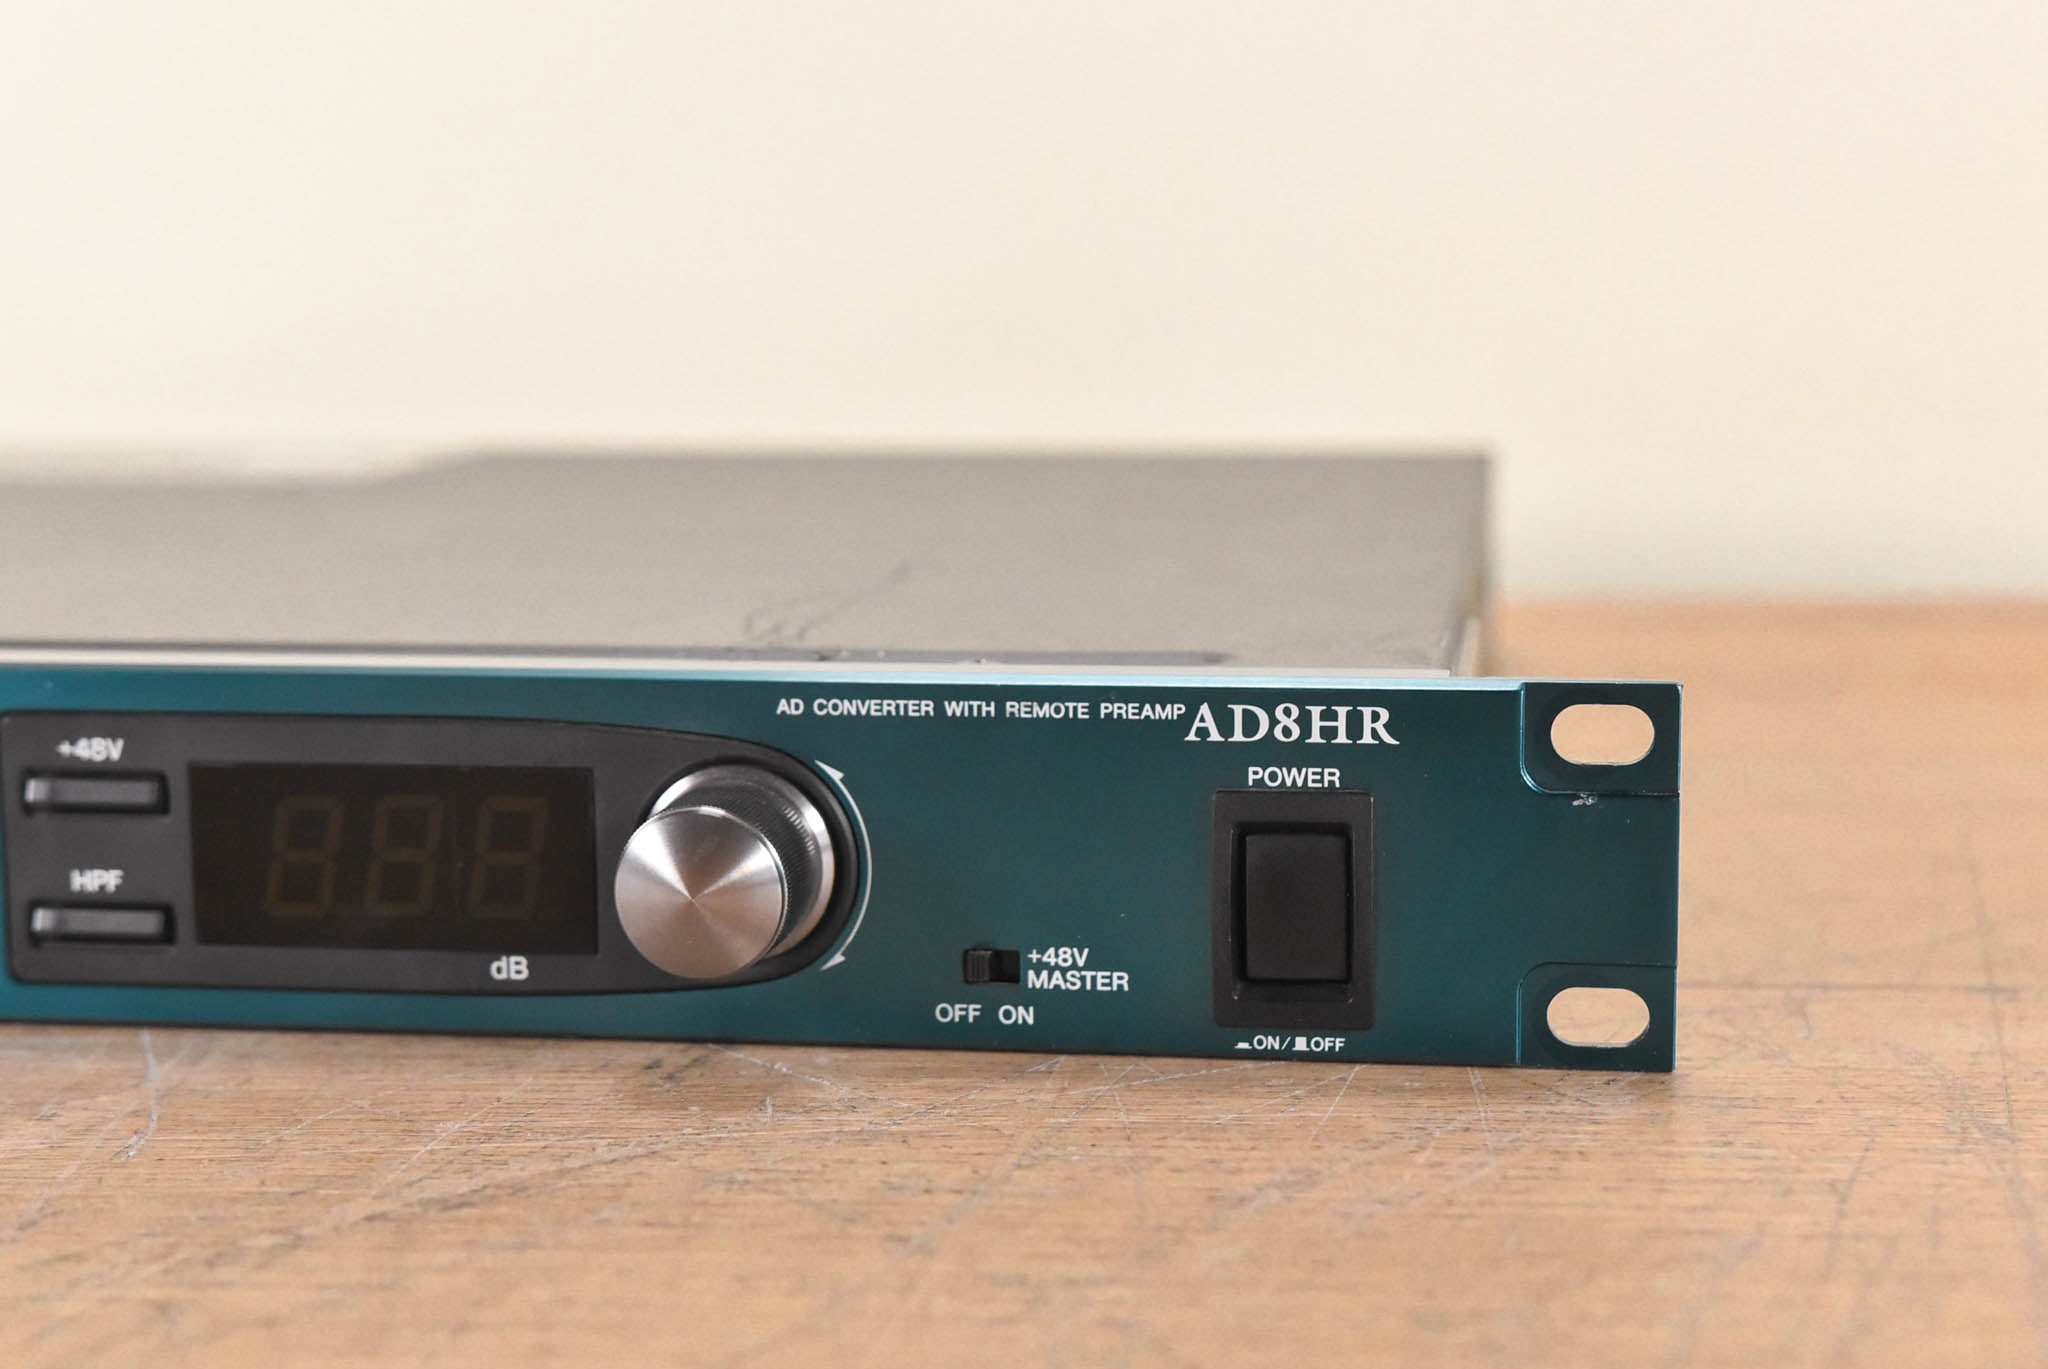 Yamaha AD8HR AD Converter with Remote Preamp